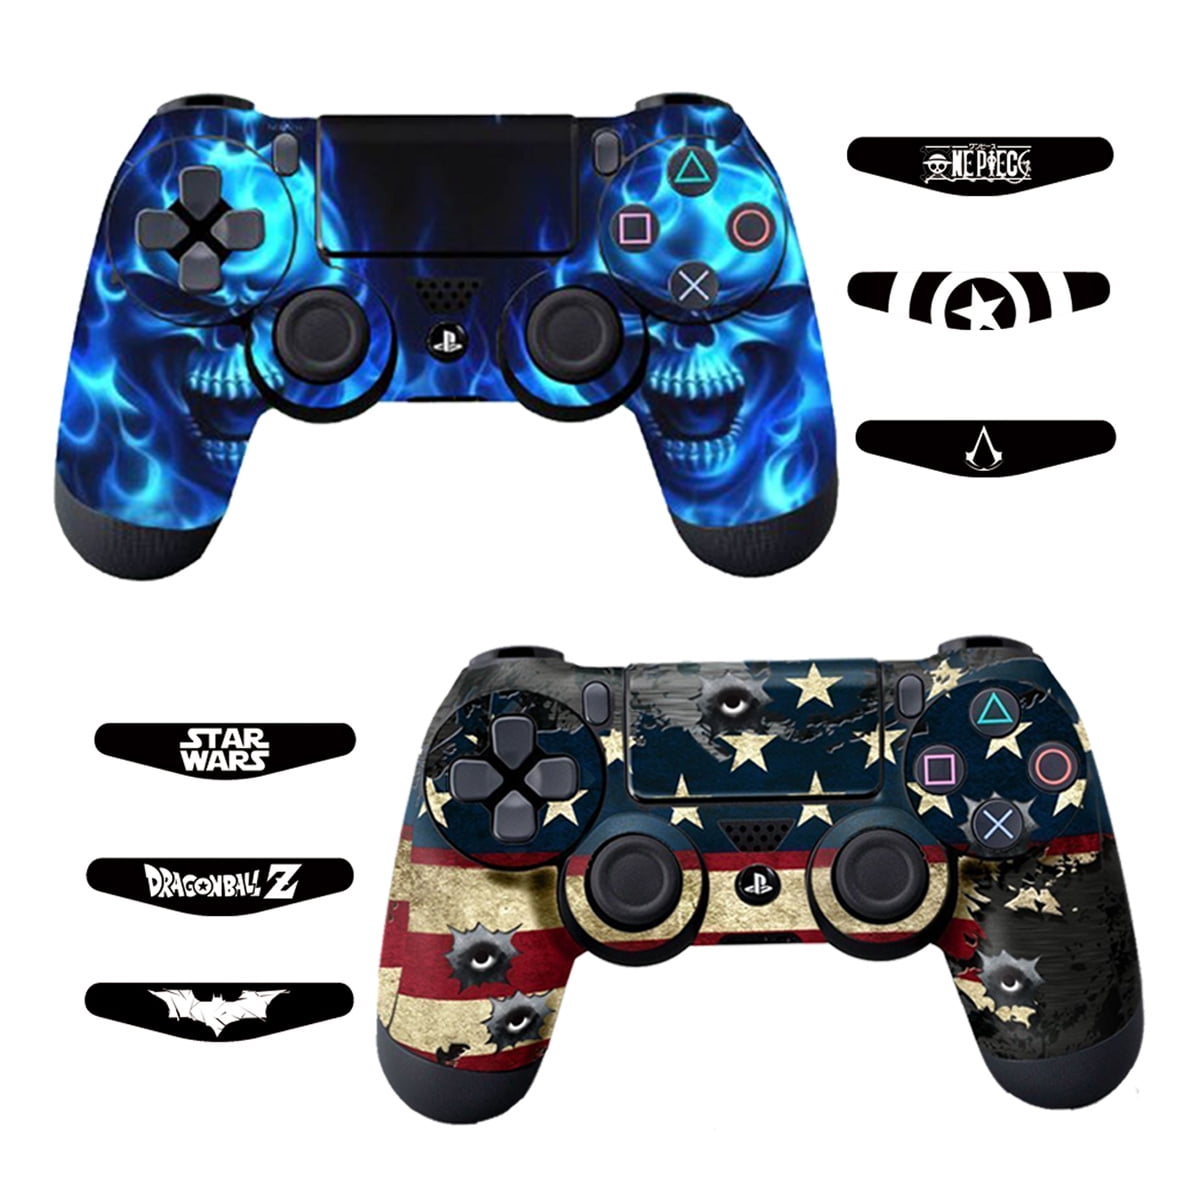 Hukommelse solidaritet ufravigelige Decals for Playstation 4 Games - Stickers Cover vinilo Calcomanía for PS4  Slim Sony Play Station Four Controllers Pro PS4 Accessories PS4 Remote  Wireless Dualshock 4 - Flag Daemon 6 Light Bar - Walmart.com